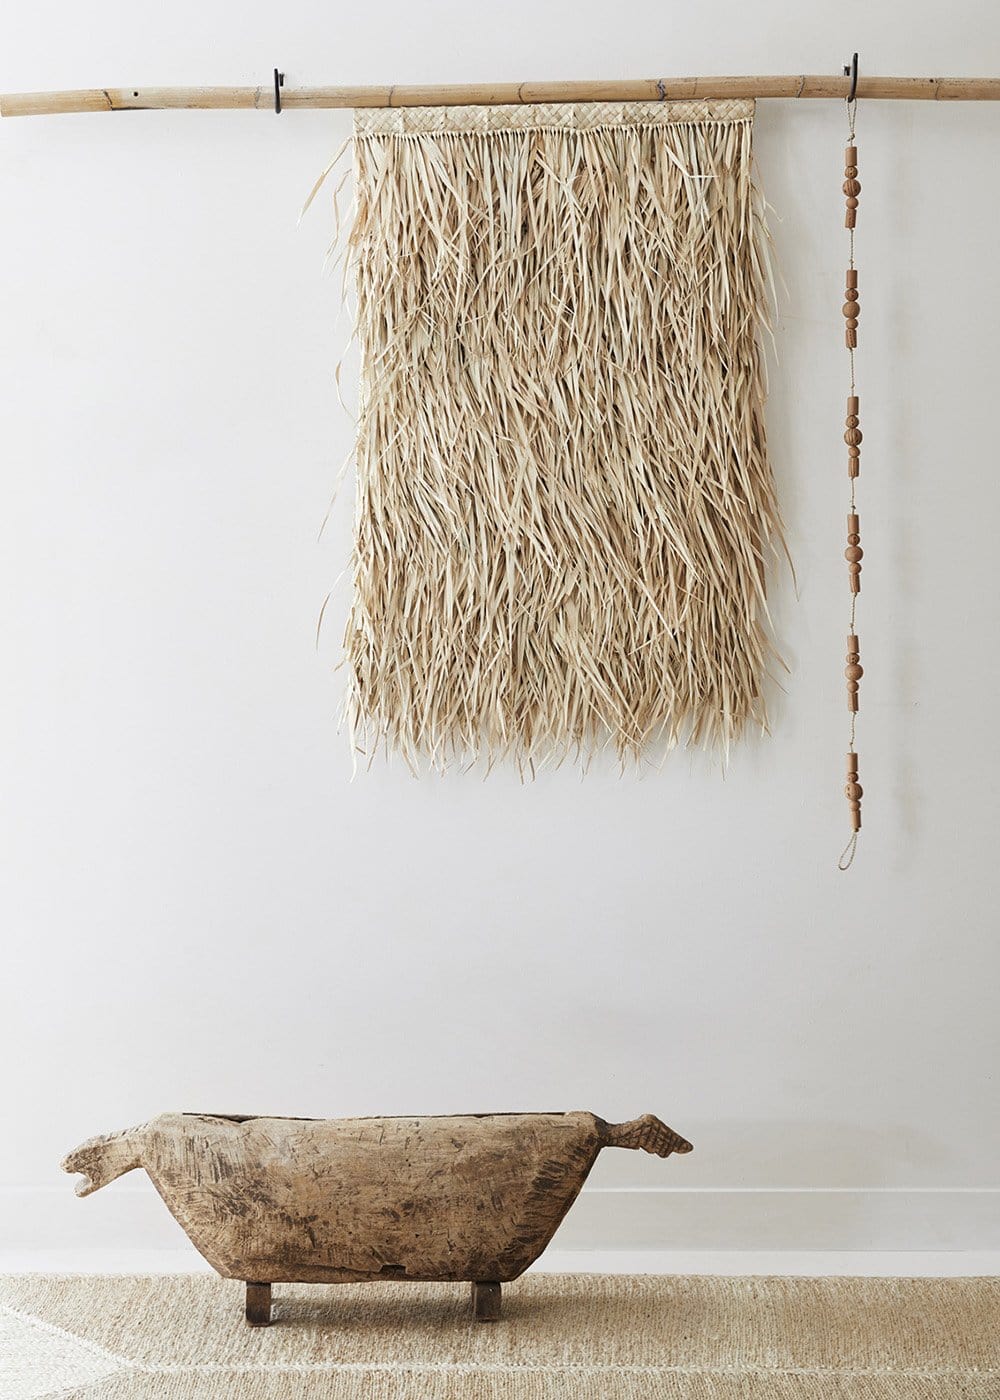 Behind the Design - New Palm Leaf Wall Hangings